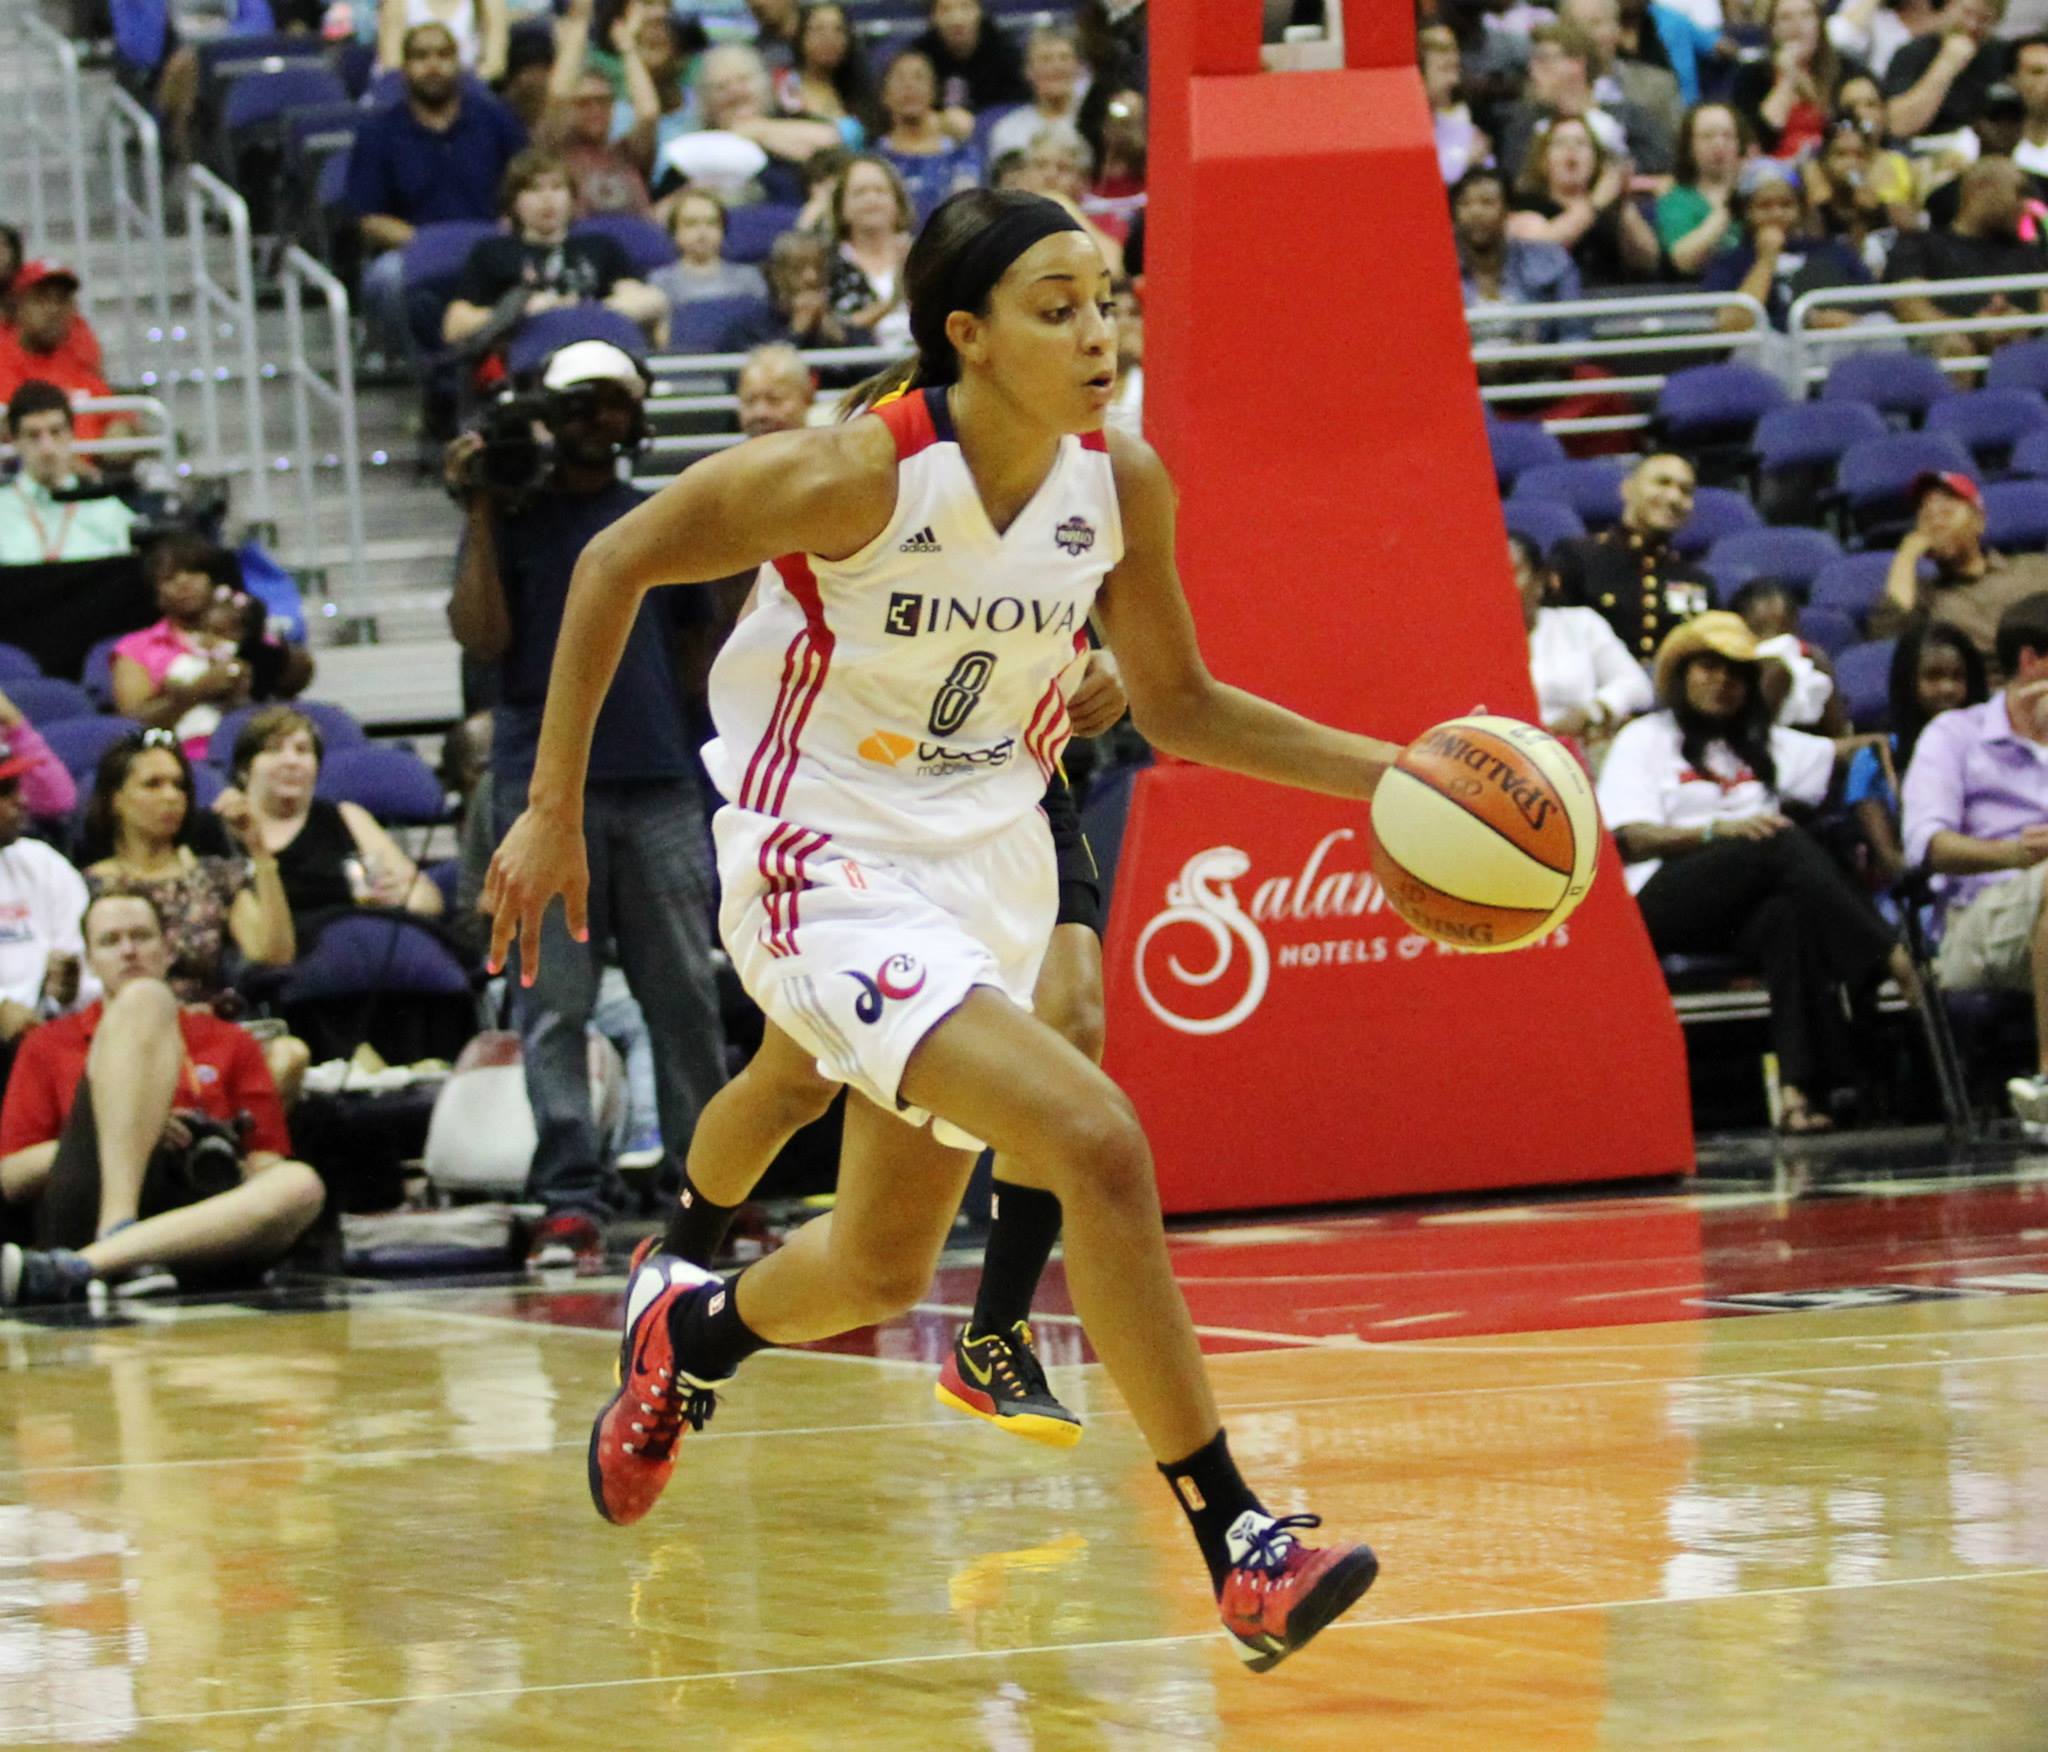 The Washington Mystics' acquisition of Bria Hartley is an example of a "slash-and-burn" roster move. I'd like to say that she's doing just fine in D.C.